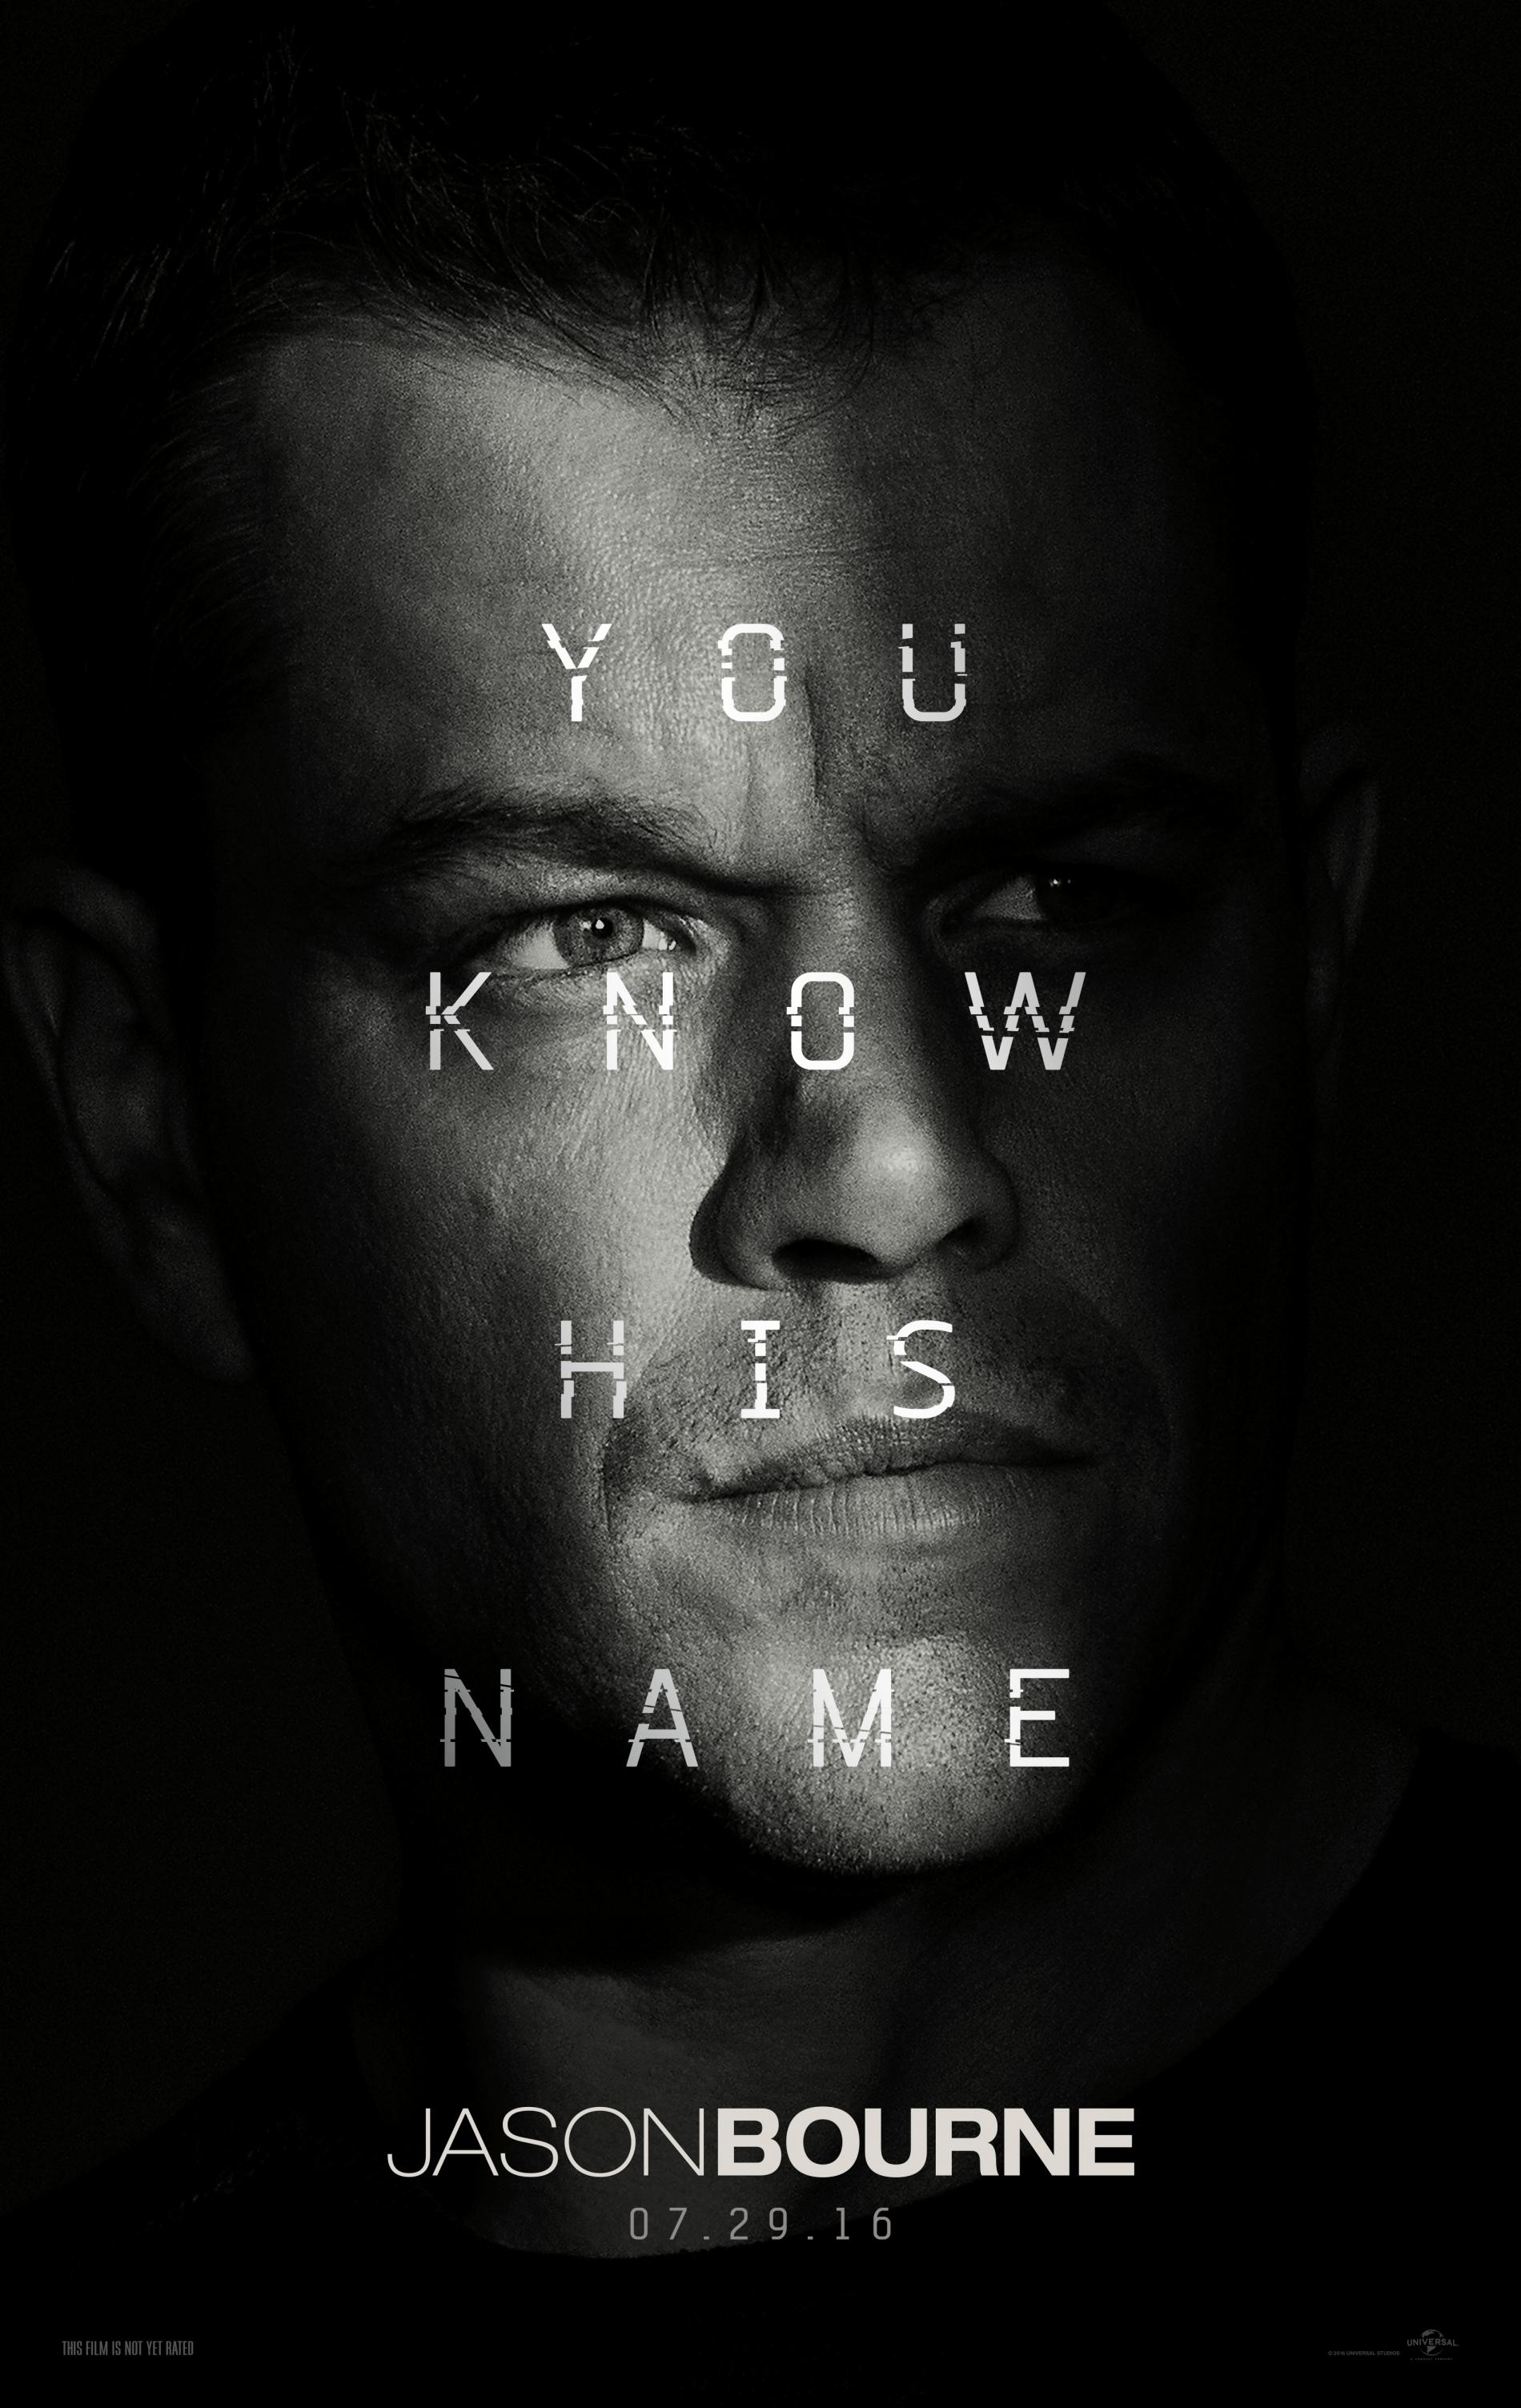 Jason Bourne Poster. In Theaters Now